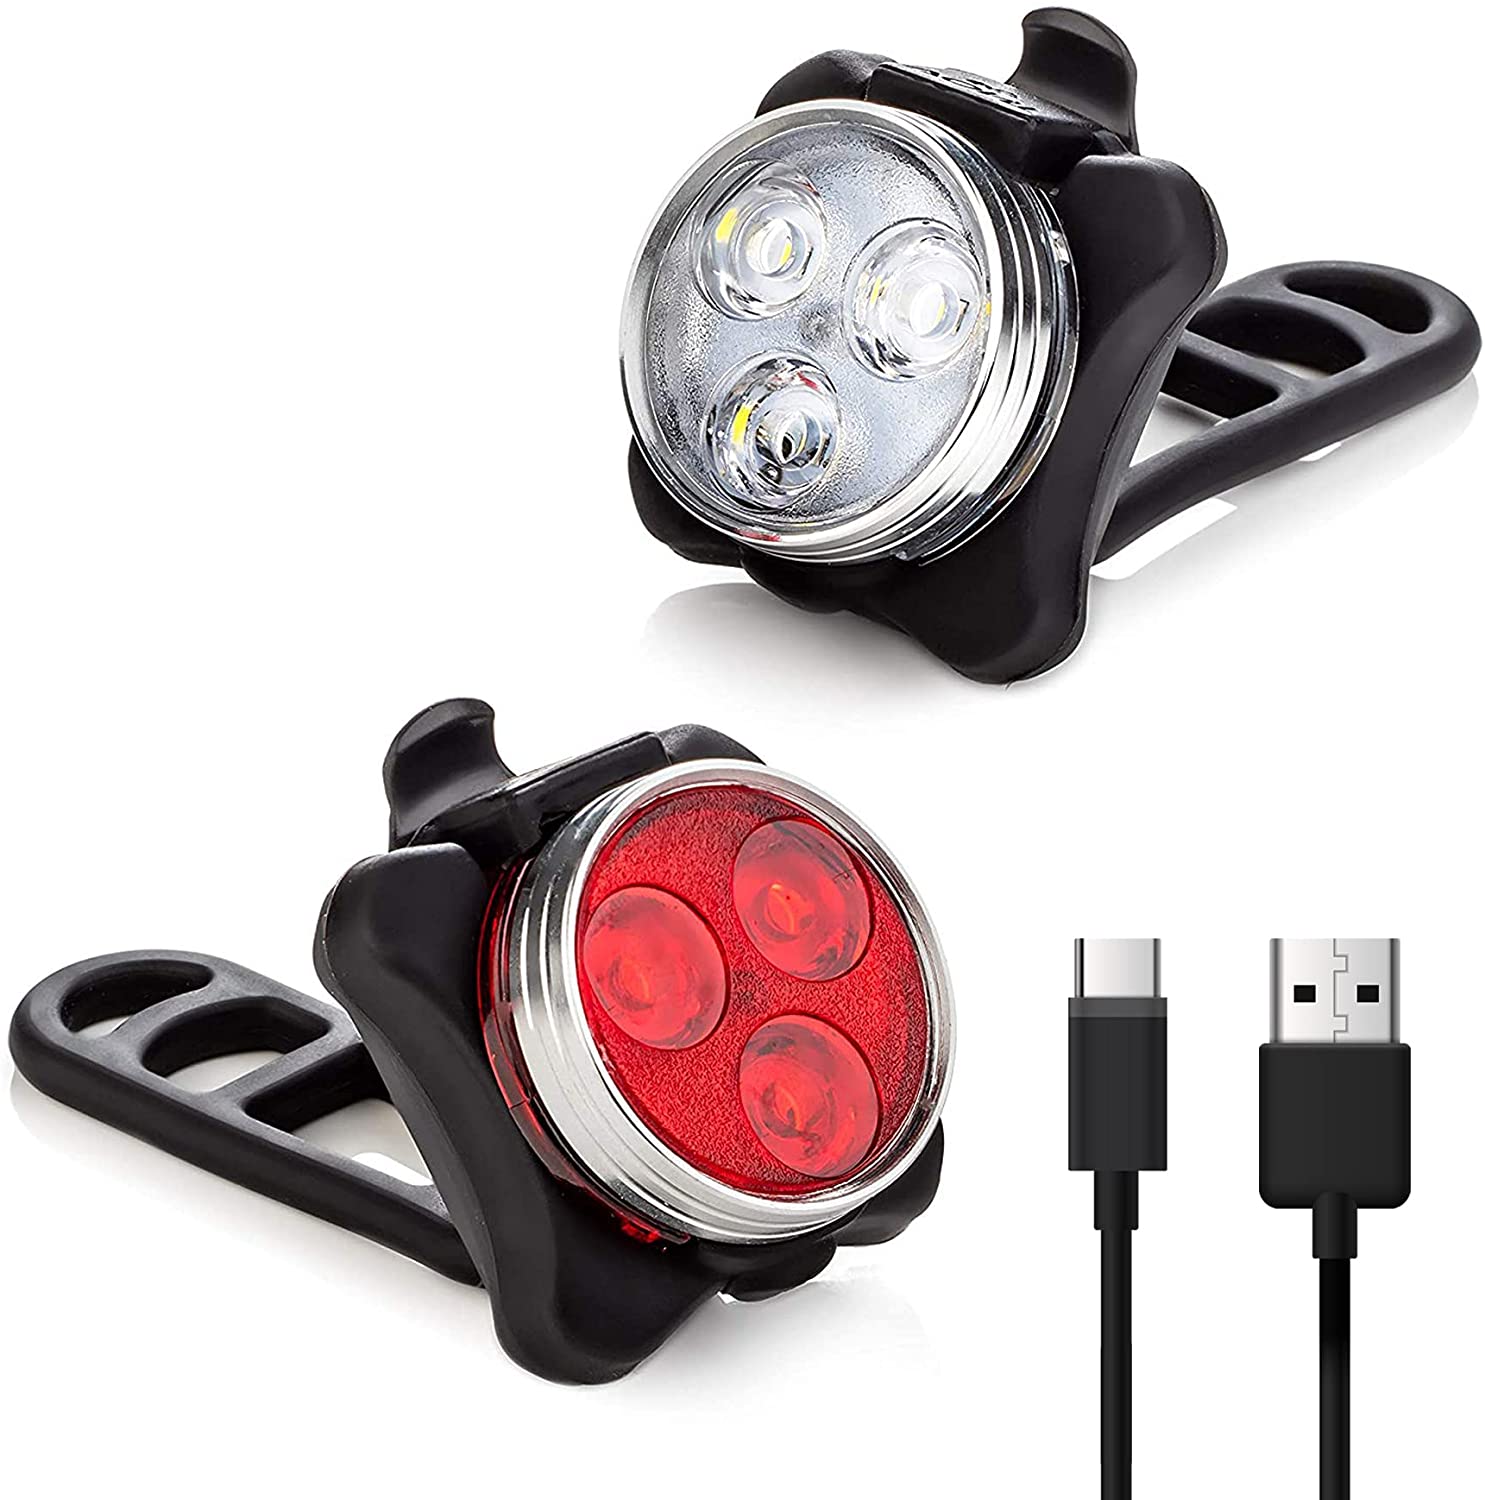 Waterproof Bike Lights Front and Back 2 Cables, 4 Straps Bike Headlight USB Rechargeable Super Bright Bicycle Light TAESOUW Bike Light Set 4 Modes 2X Longer Battery Life 